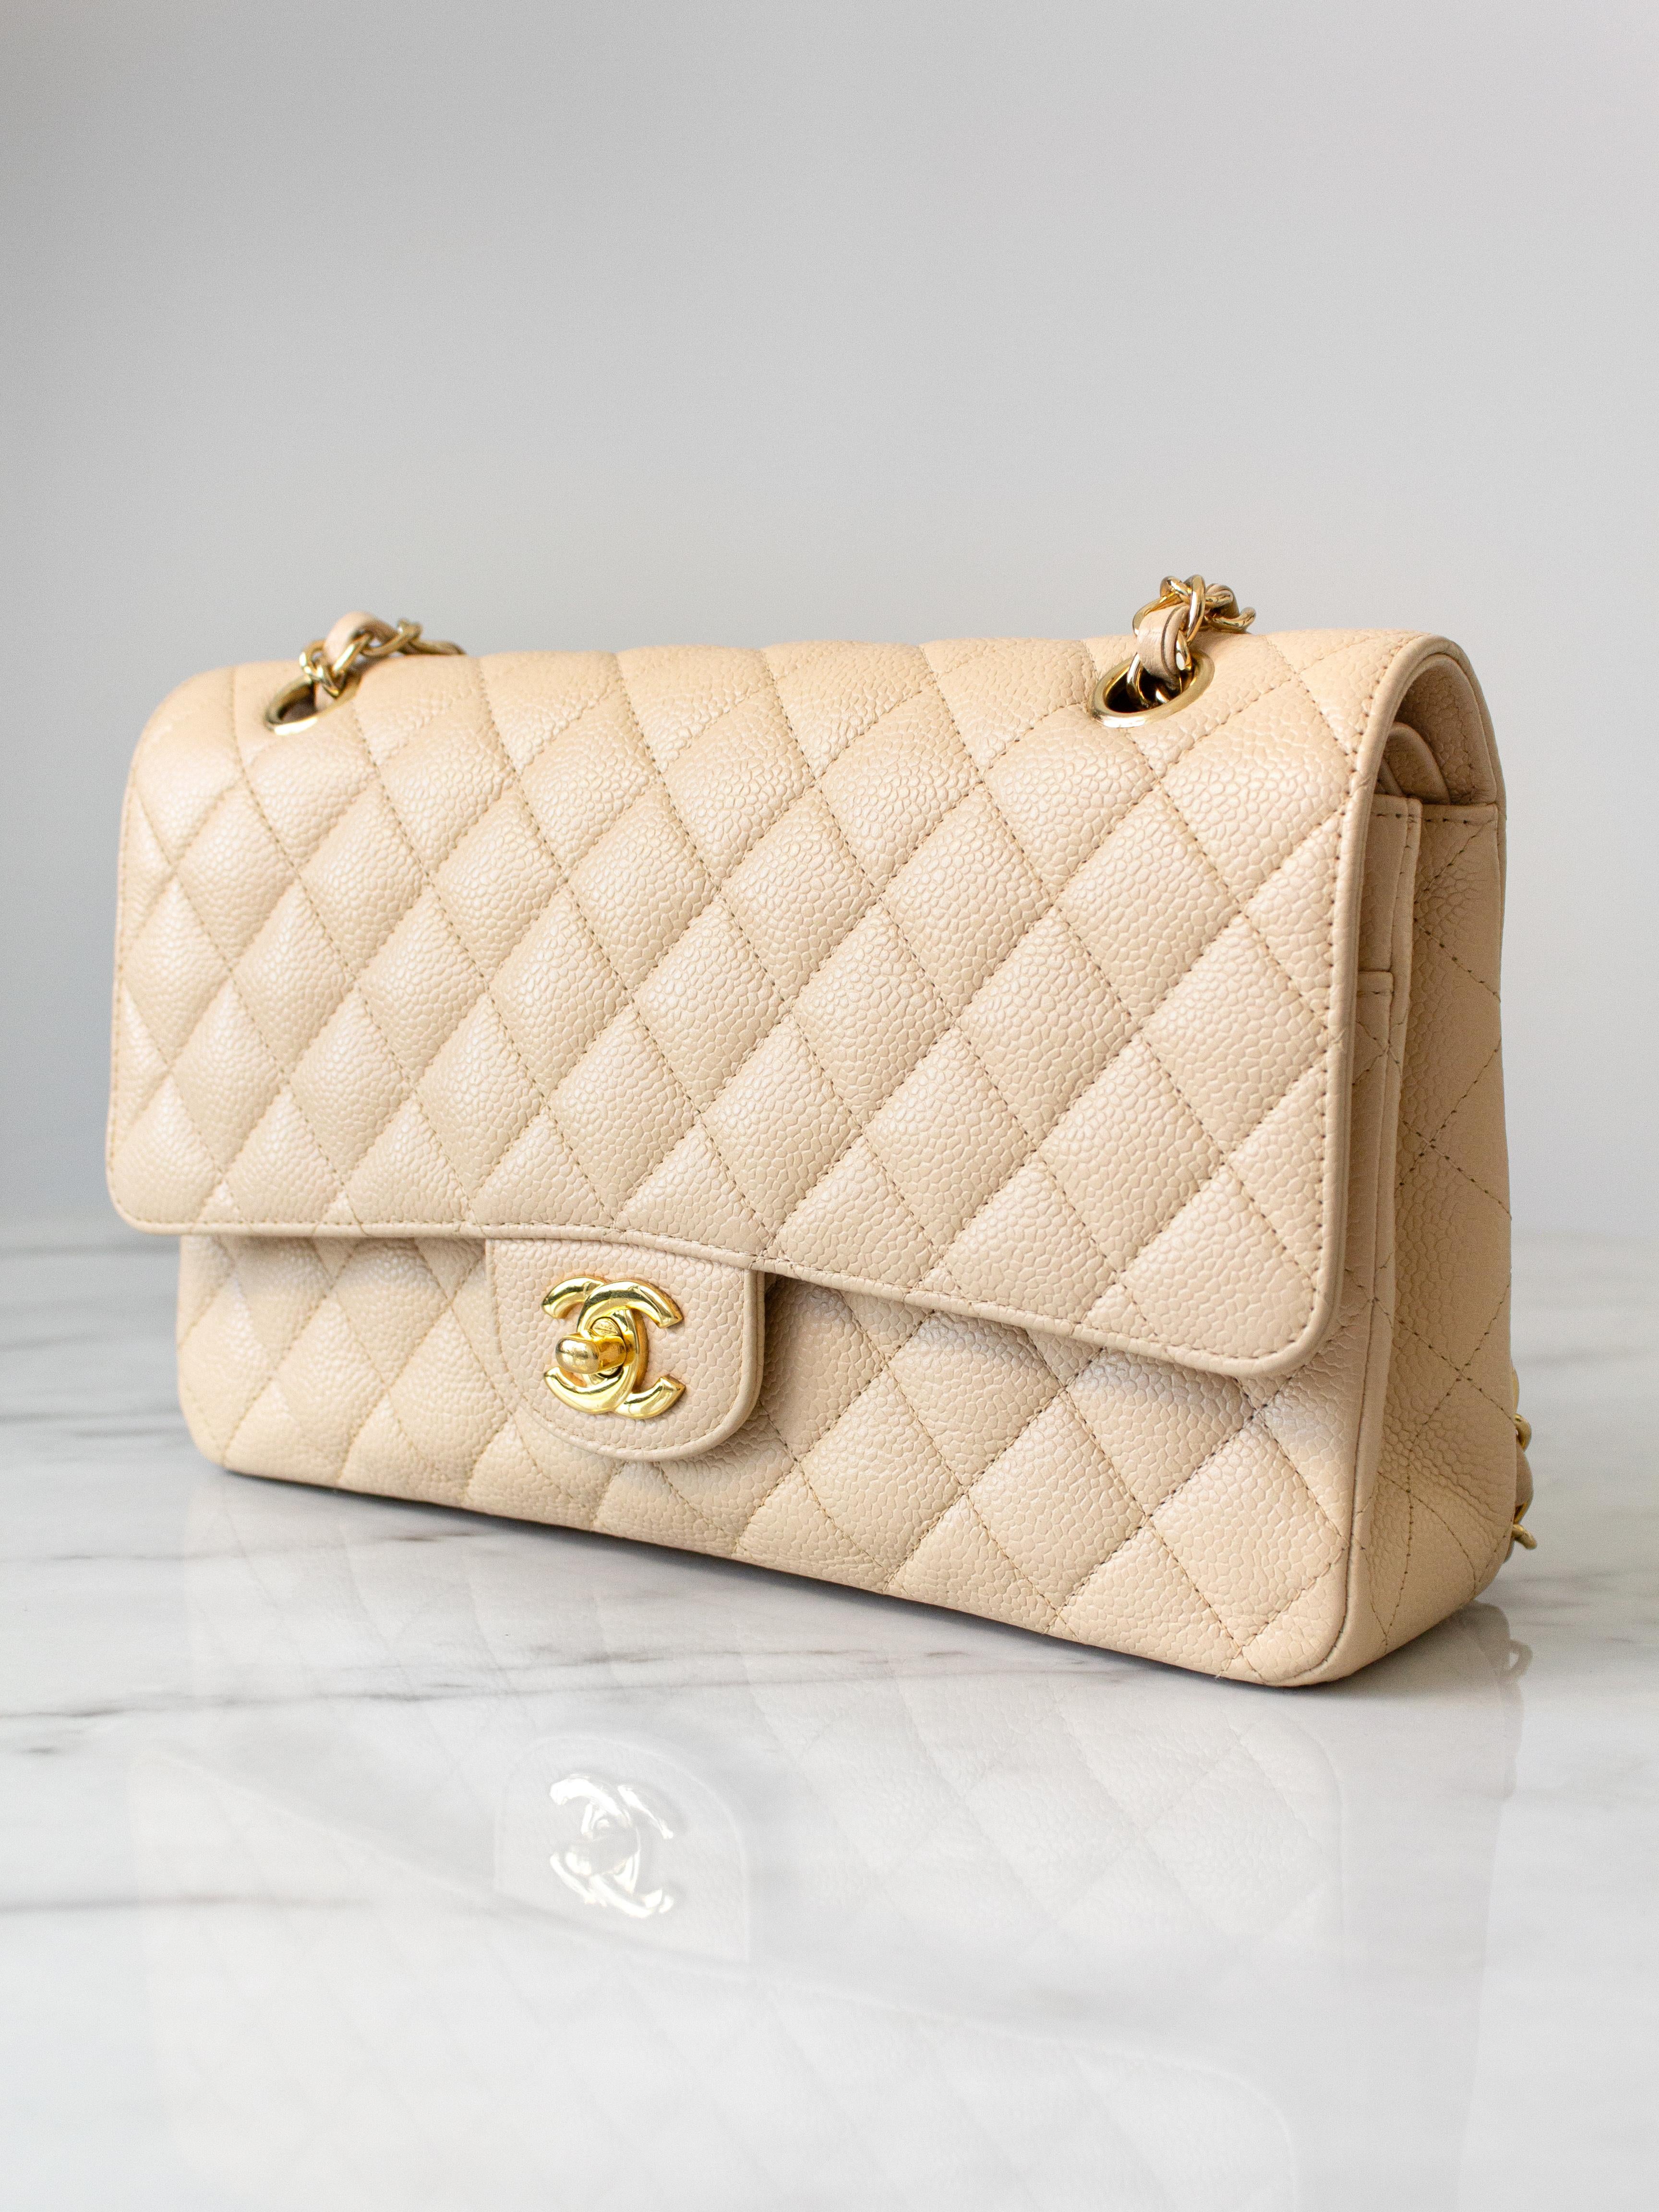 Chanel Medium Classic Double Flap Beige Clair Caviar Leather Gold GHW 2010 Bag In Good Condition For Sale In Jersey City, NJ